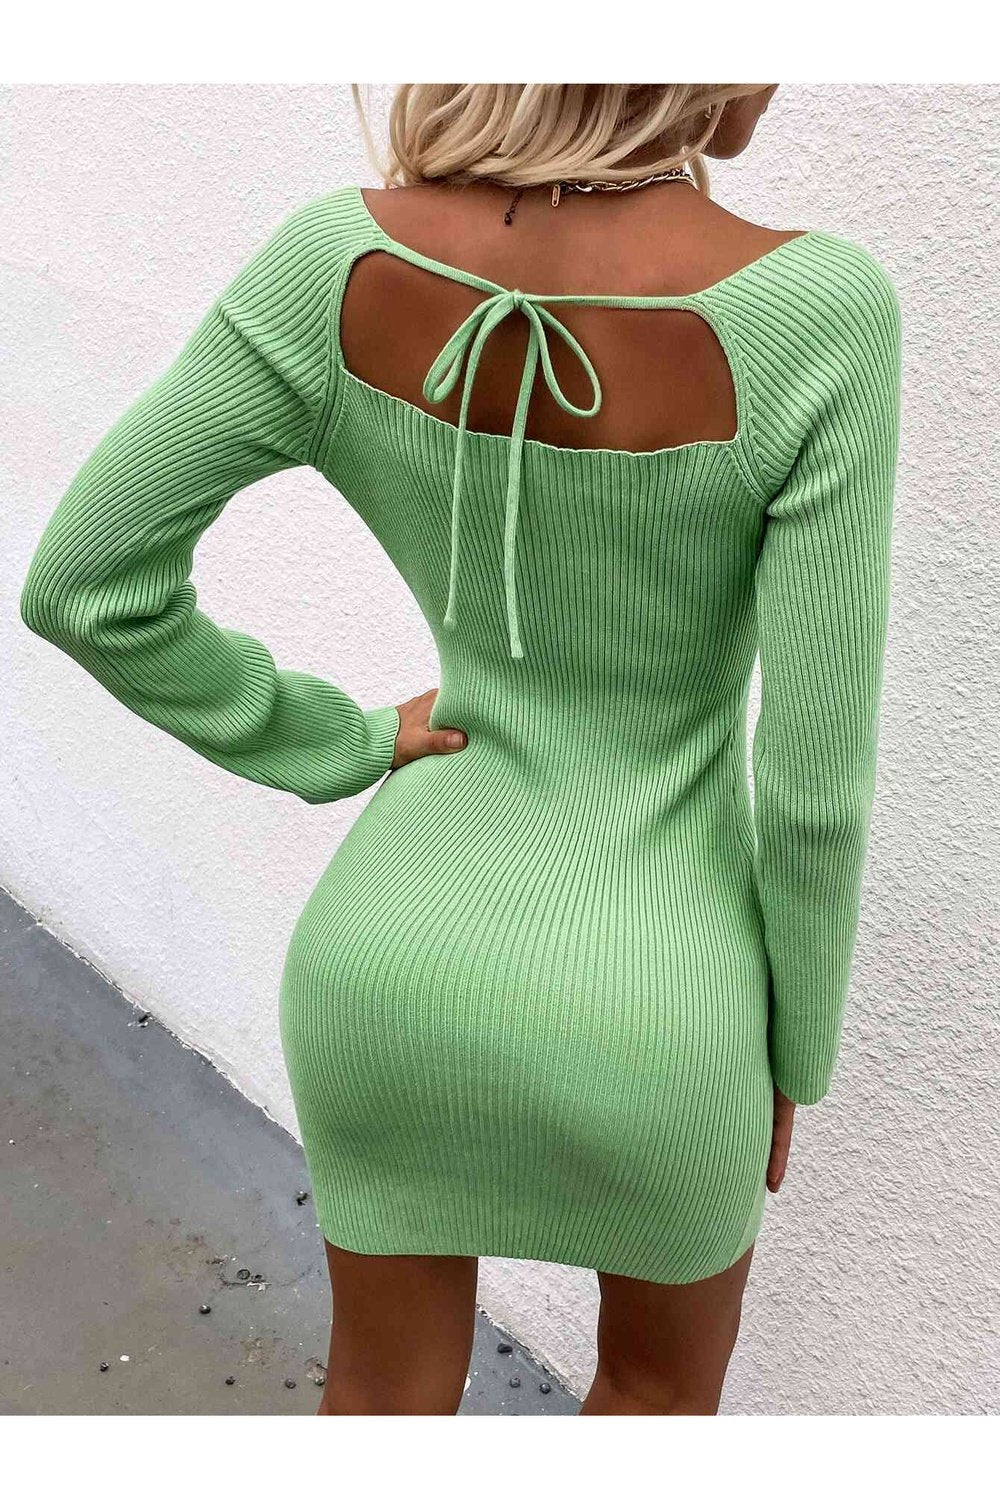 Tie Back Square Neck Long Sleeve Sweater Dress - Sweater Dresses - FITGGINS